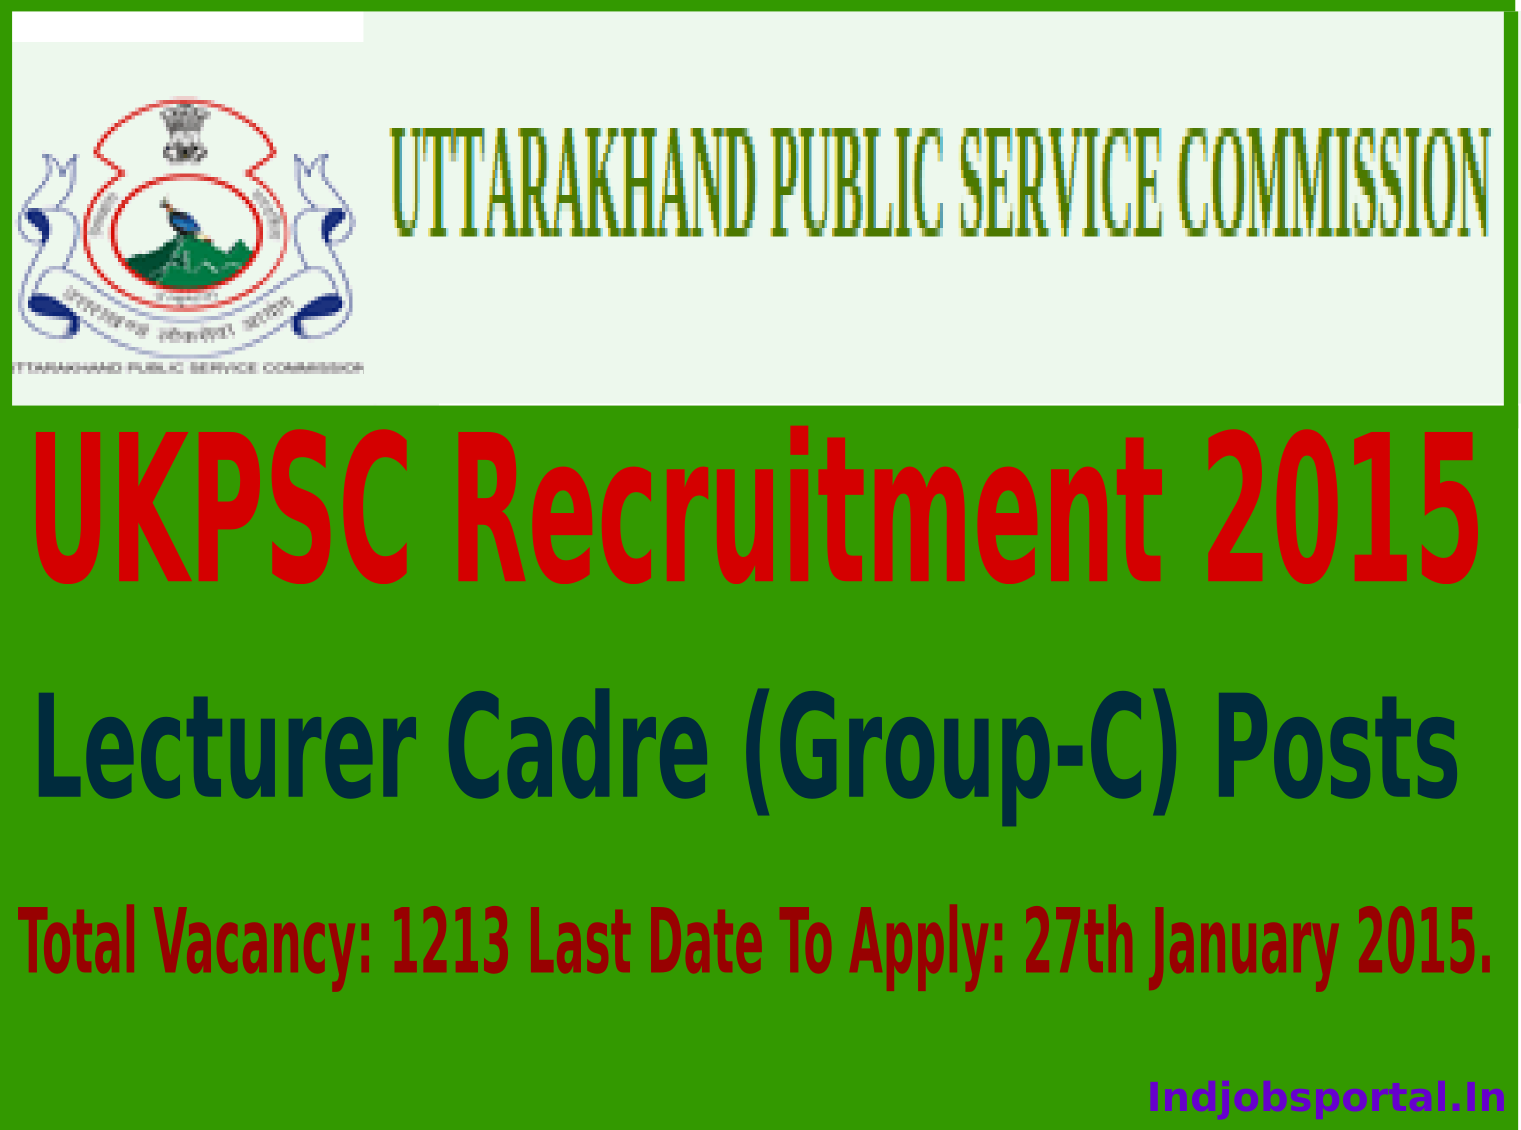 UKPSC Recruitment 2015 For 1213 Lecturer Cadre (Group-C) Posts